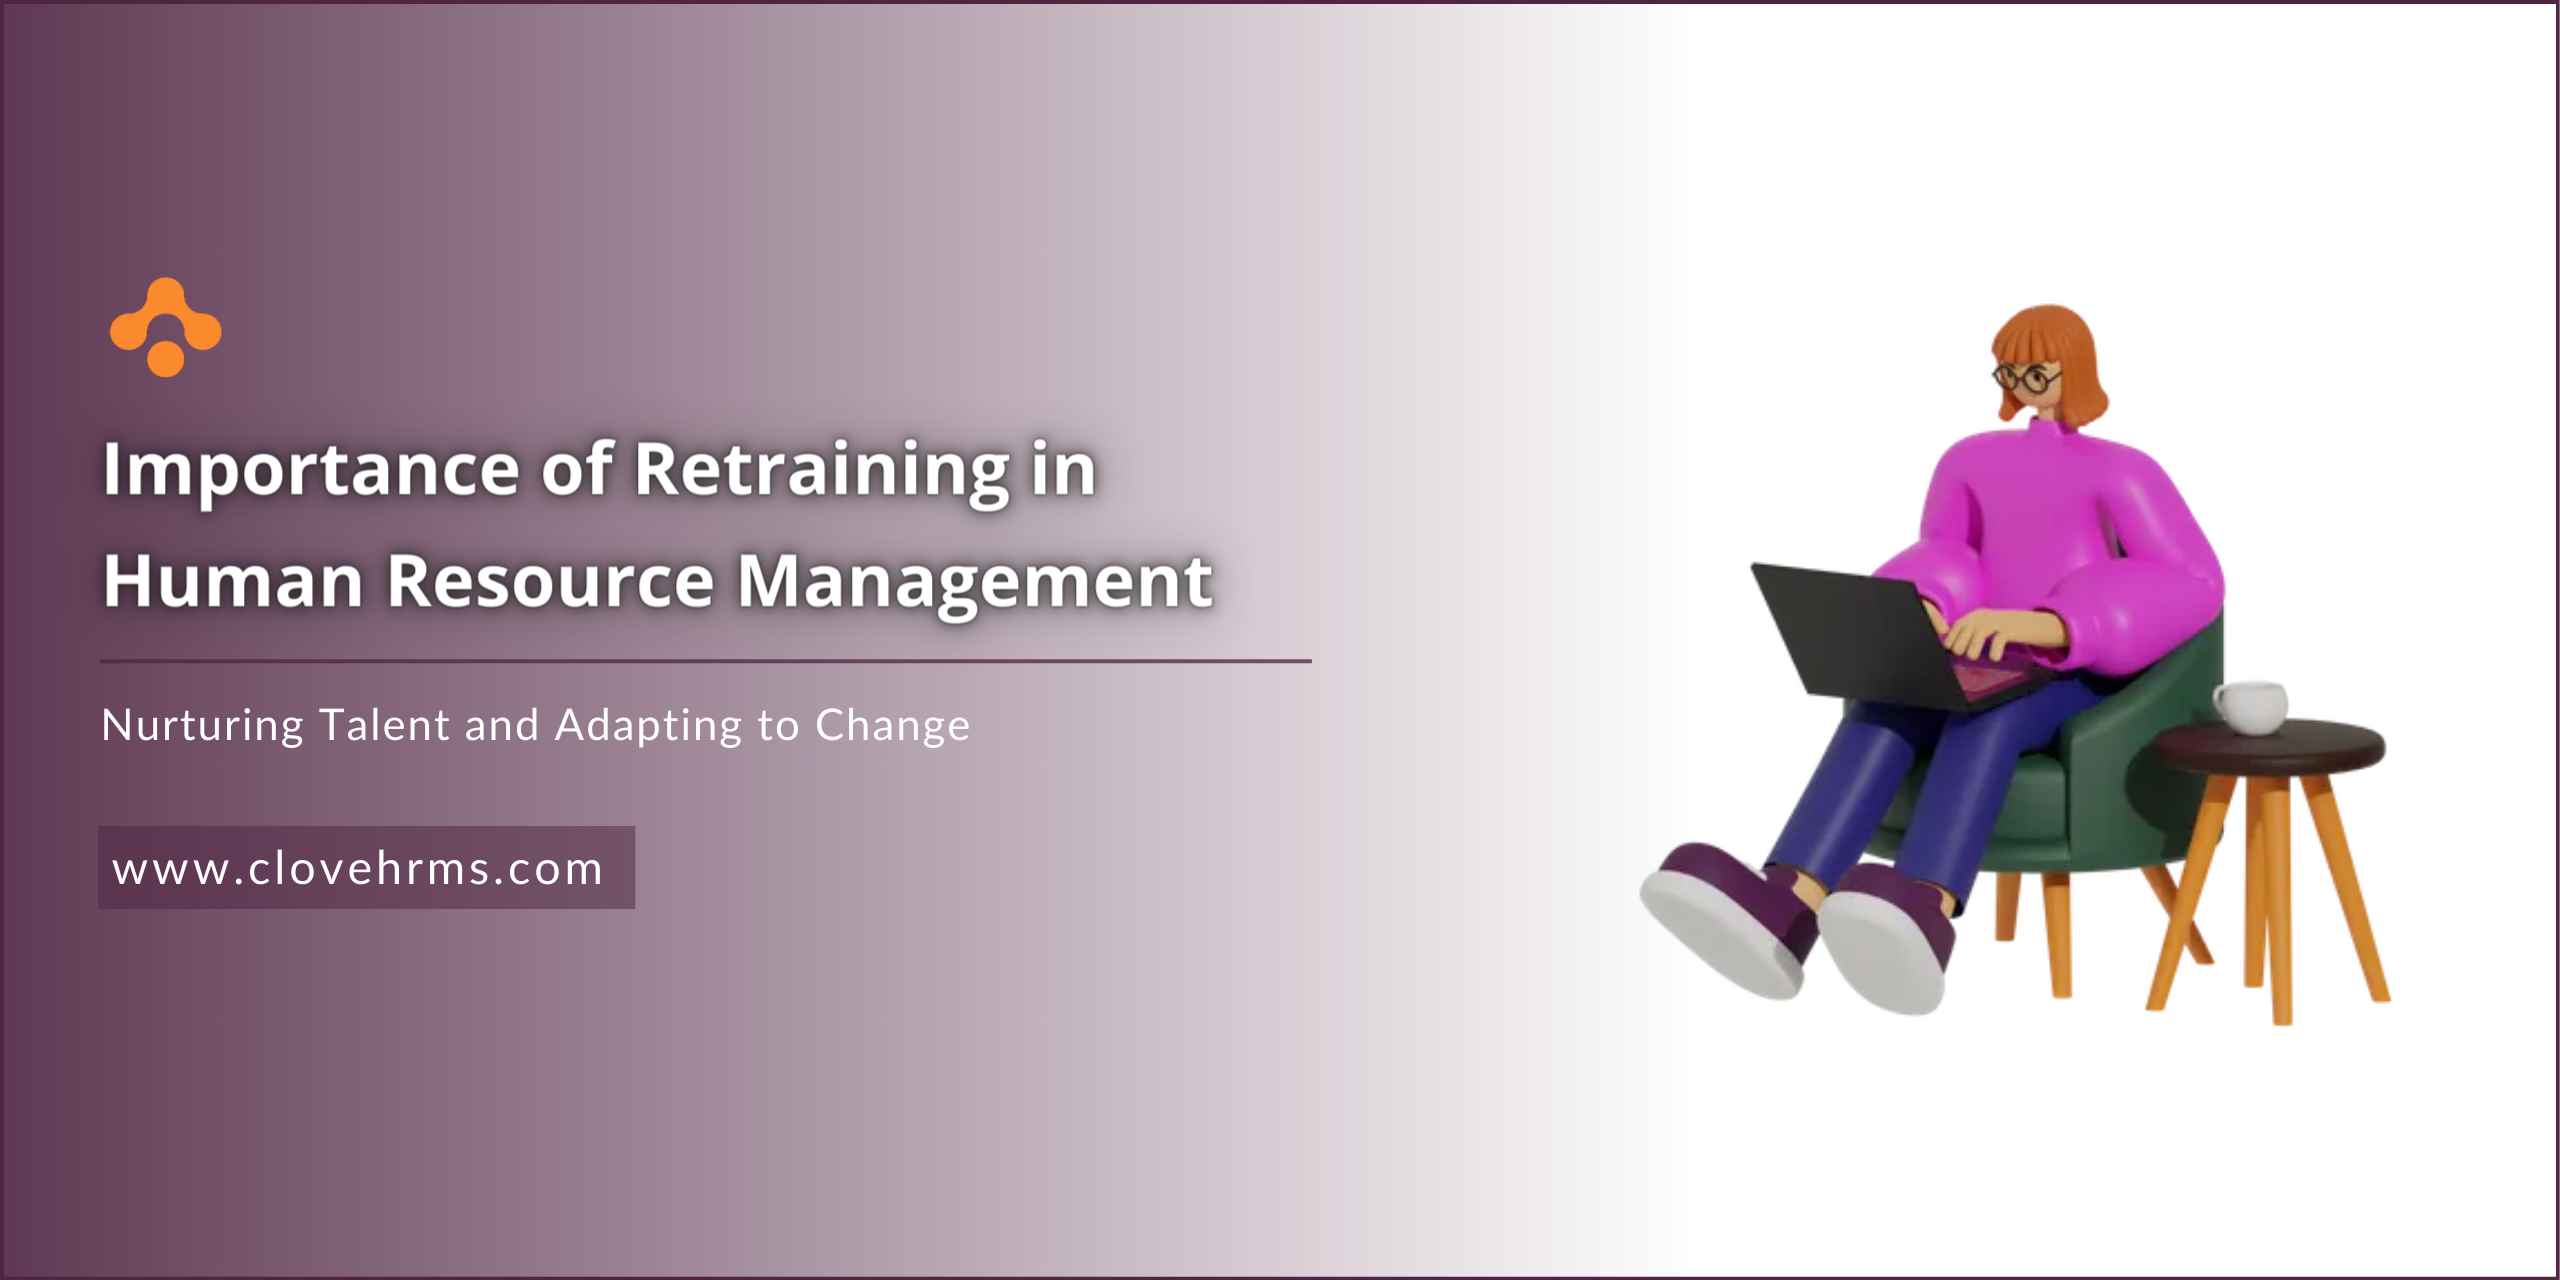 Feature image for retraining importance blog